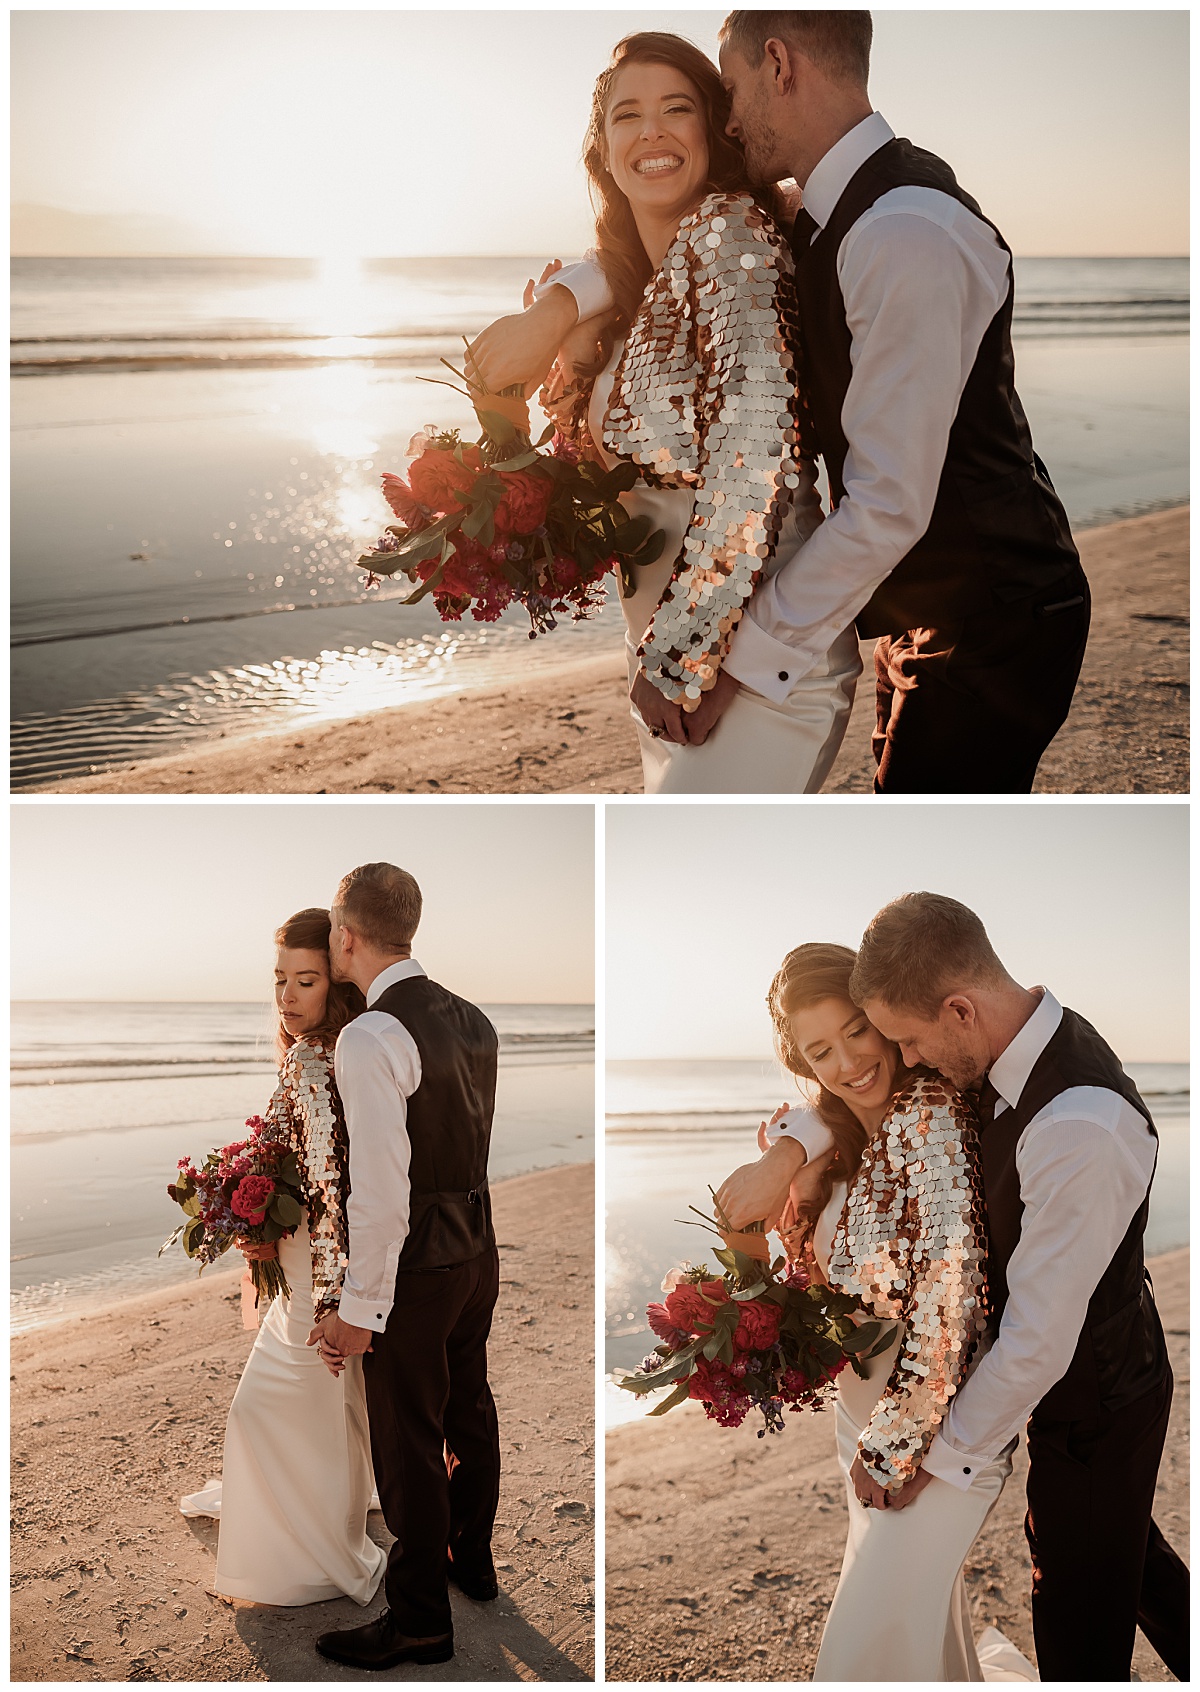 Bride and groom embrace on the beach at sunset. 